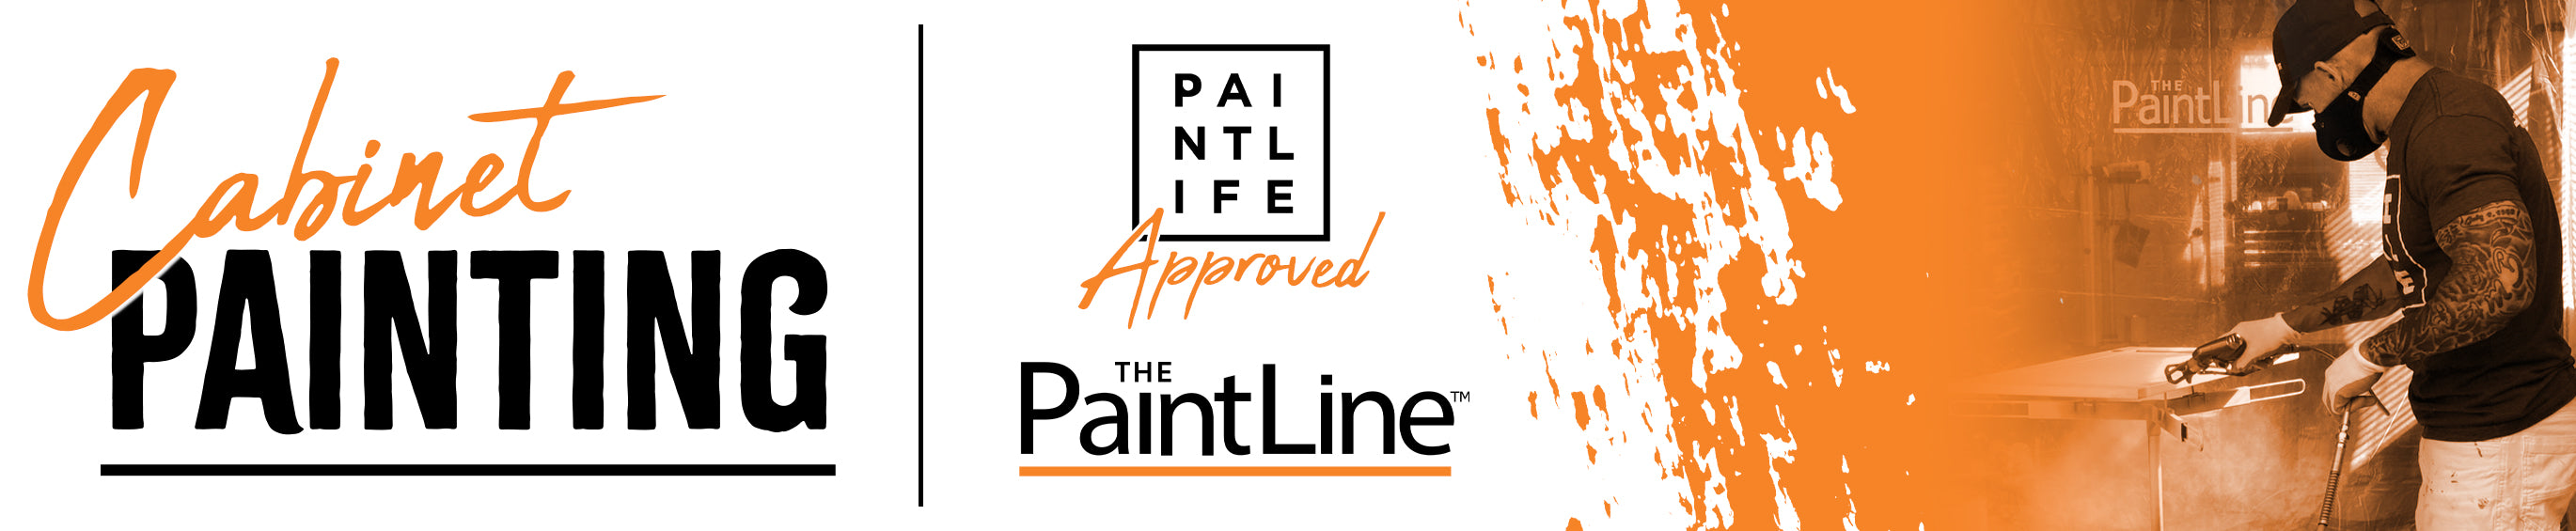 Paint Life Supply Co. Cabinet Painting Tools